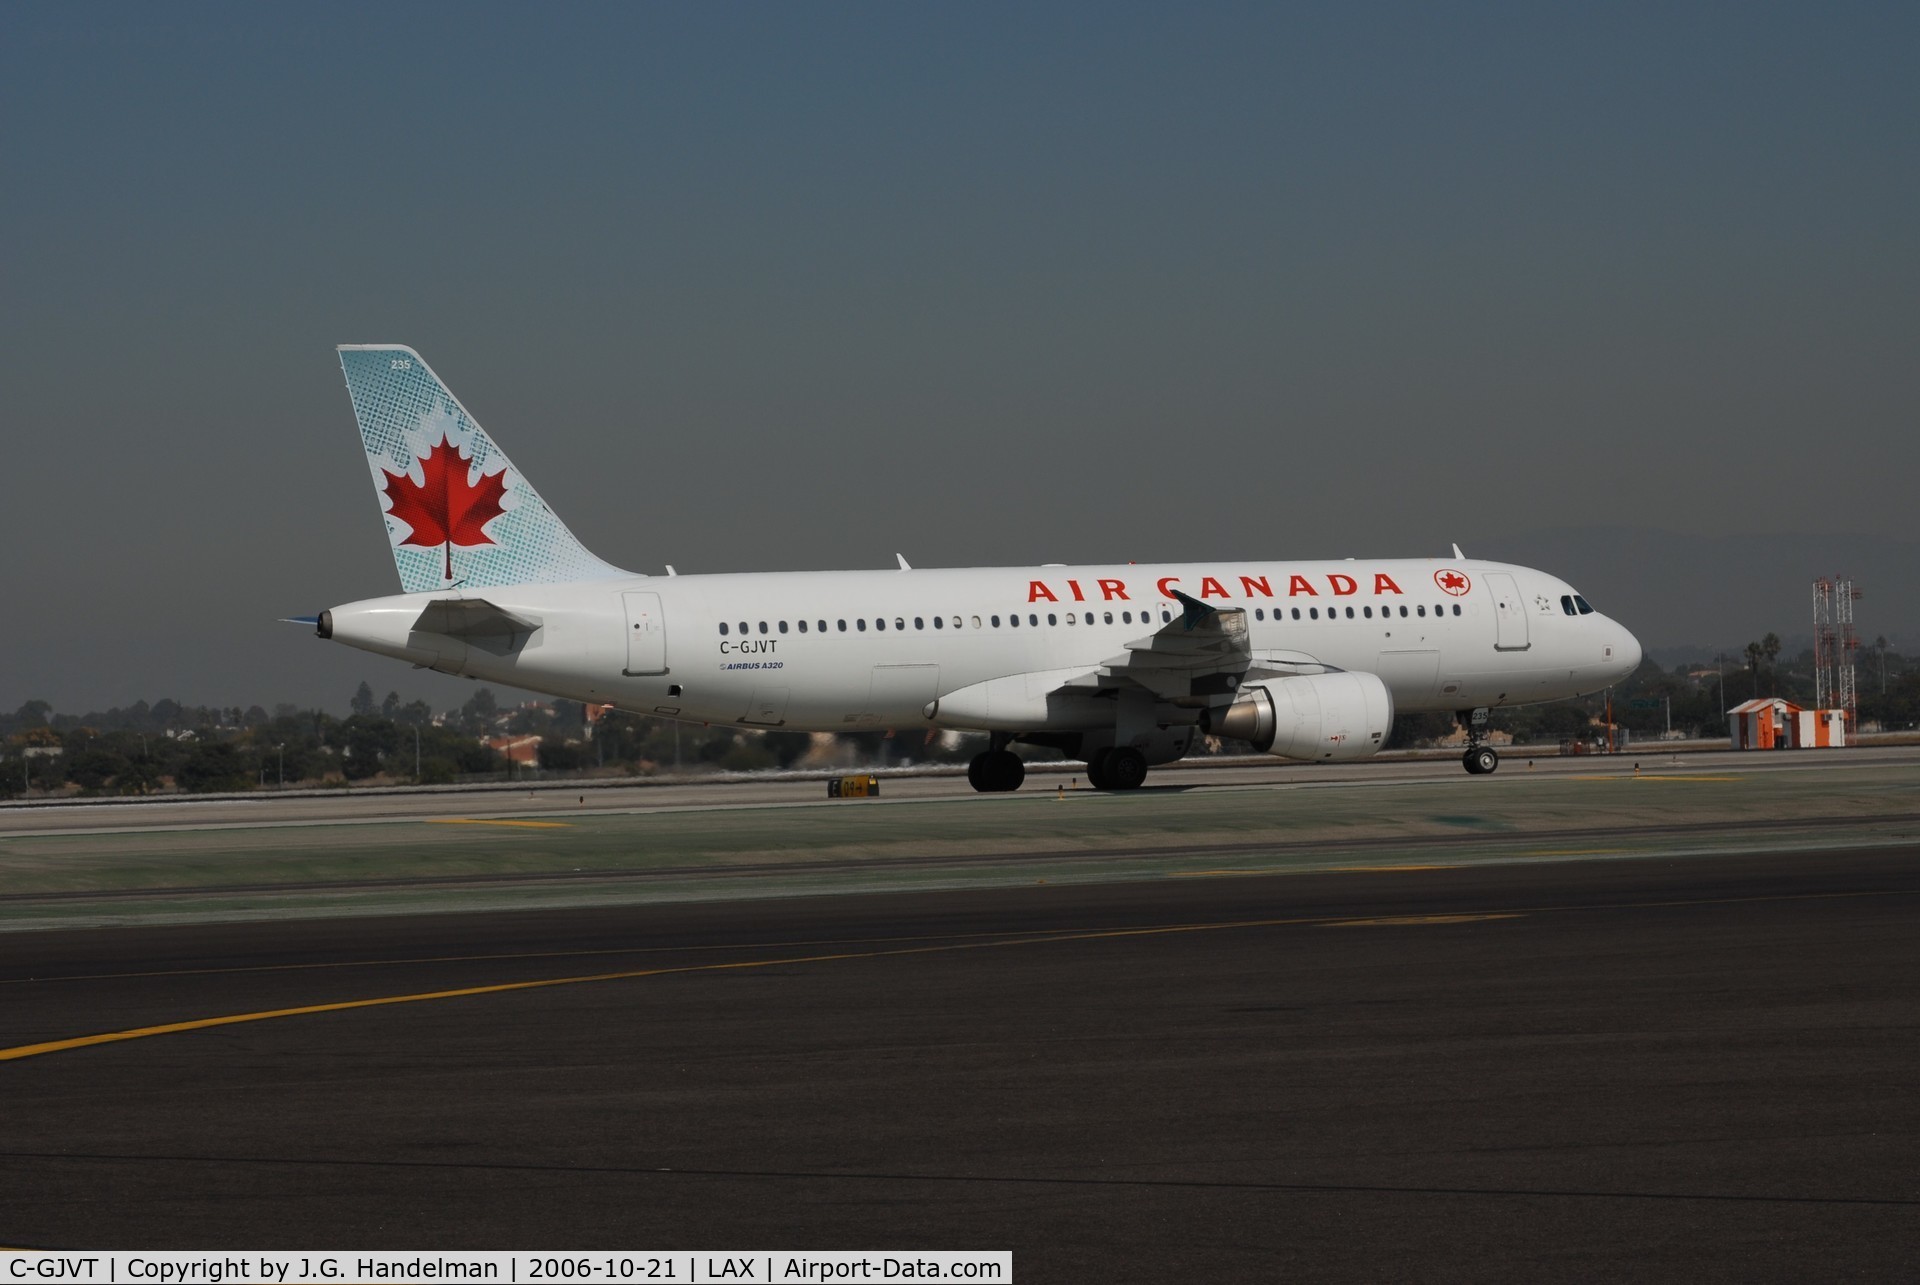 C-GJVT, 2002 Airbus A320-214 C/N 1719, Taxiing at LAX